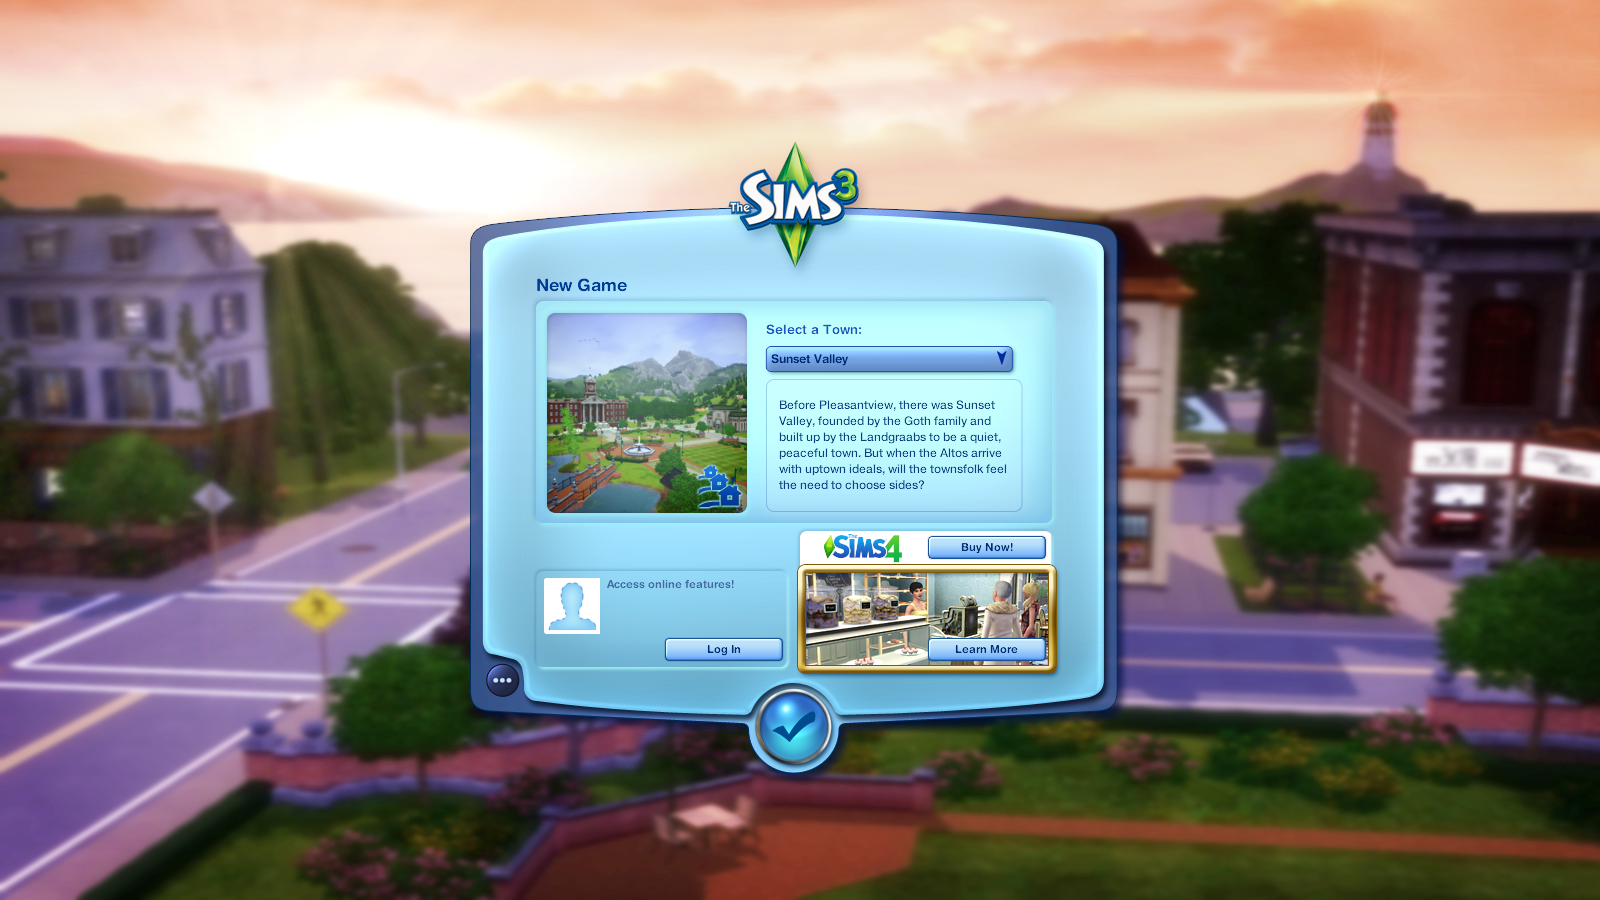 The game generated this sim's name on its own in Sunset Valley